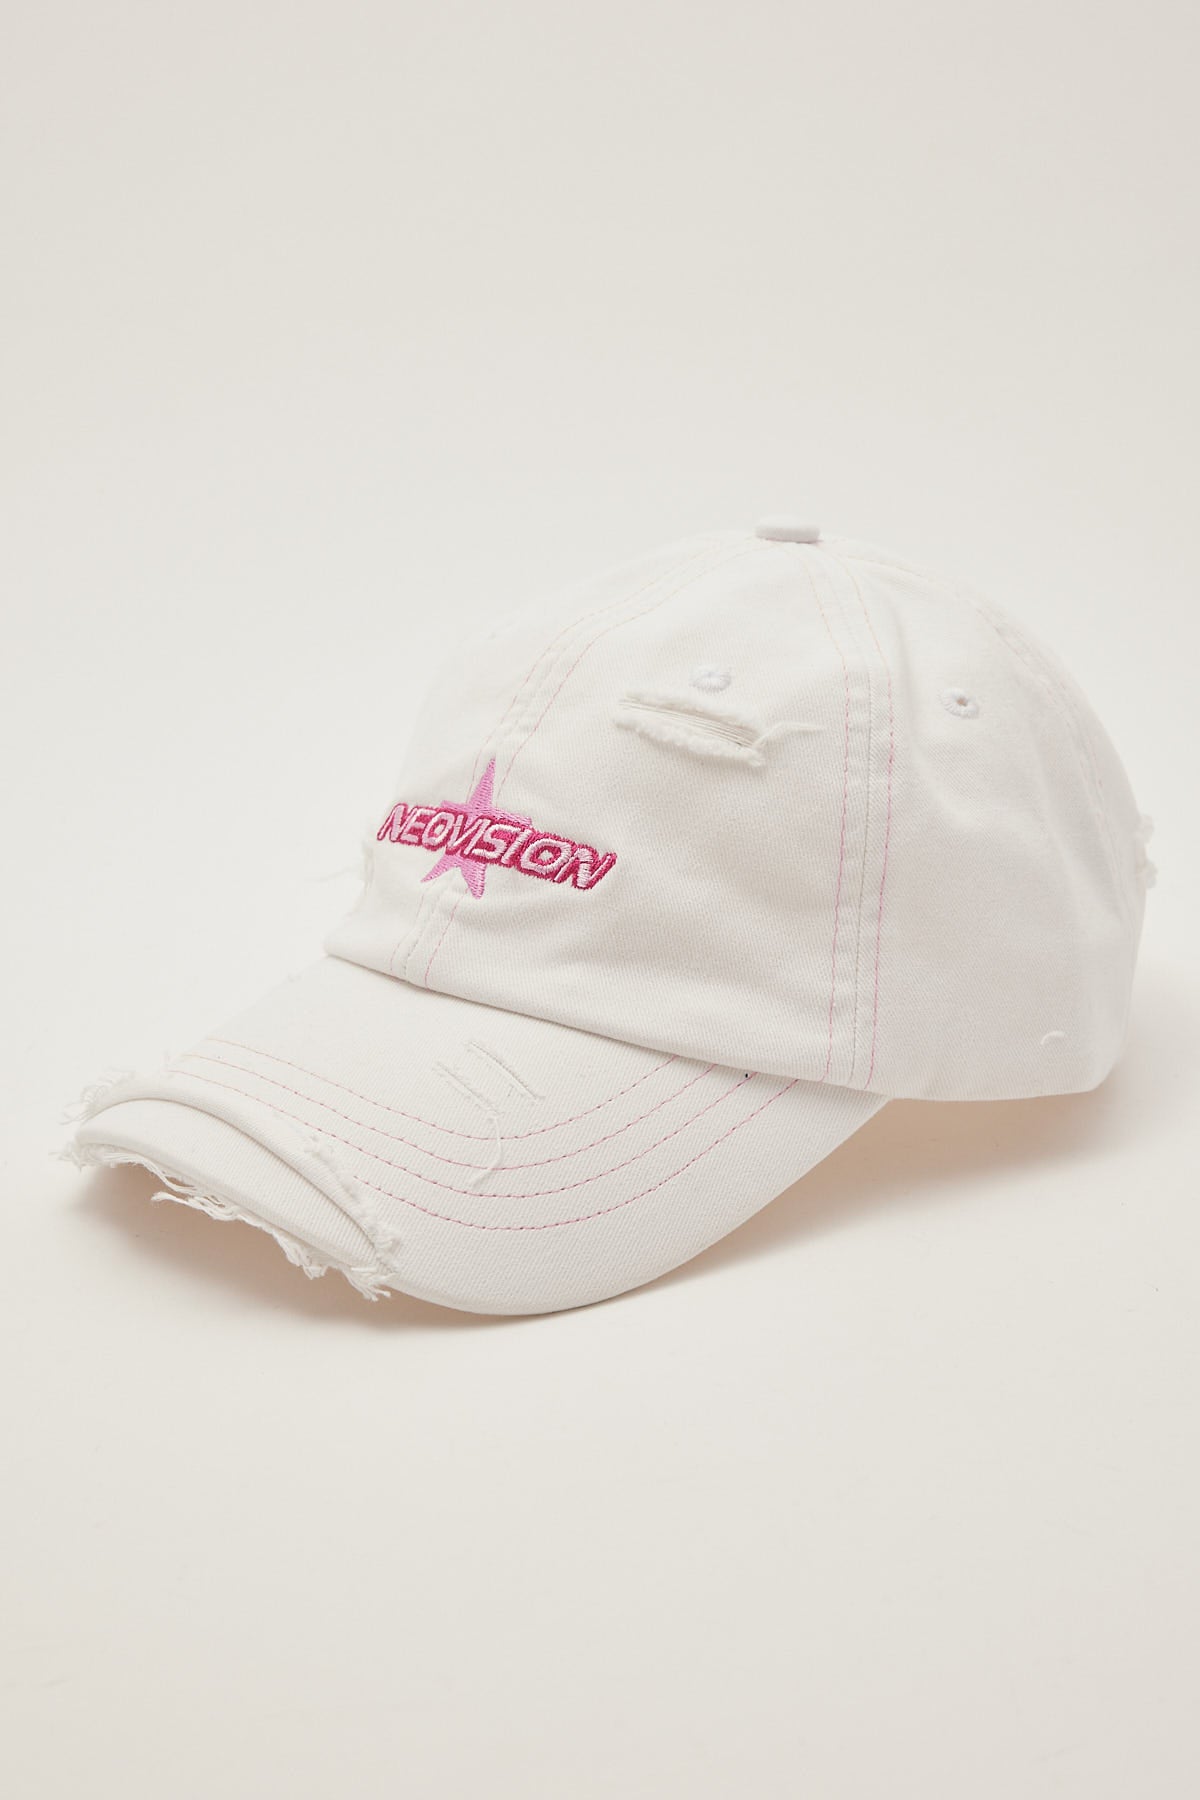 Neovision Famous Distressed Dad Cap White – Universal Store